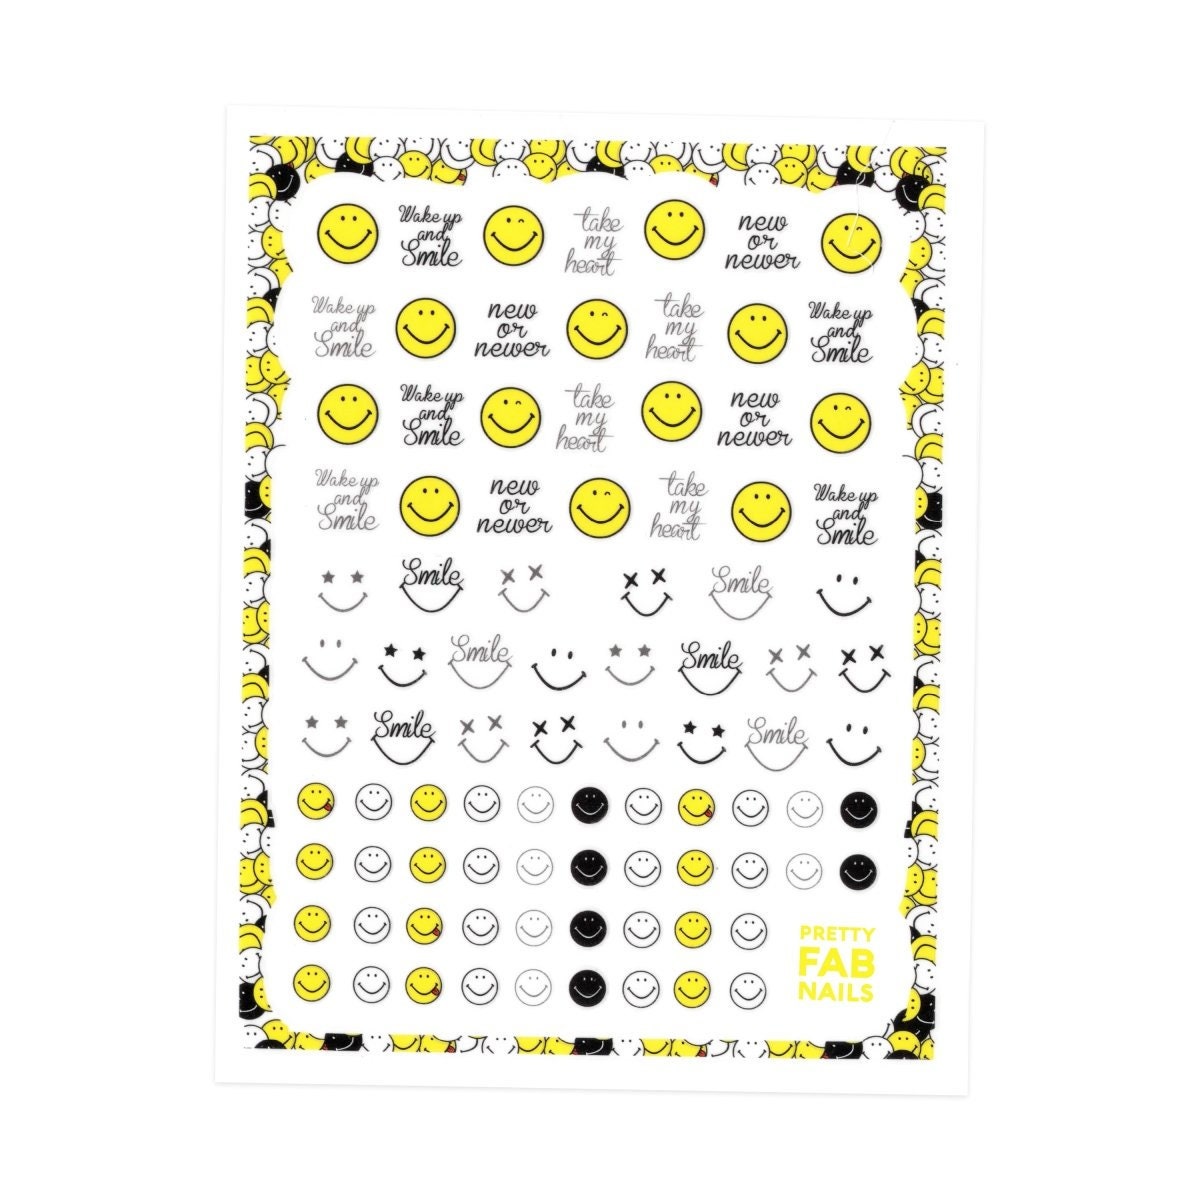 Smiley Face Nail Art Stickers – Pretty Fab Nails, Art Stickers